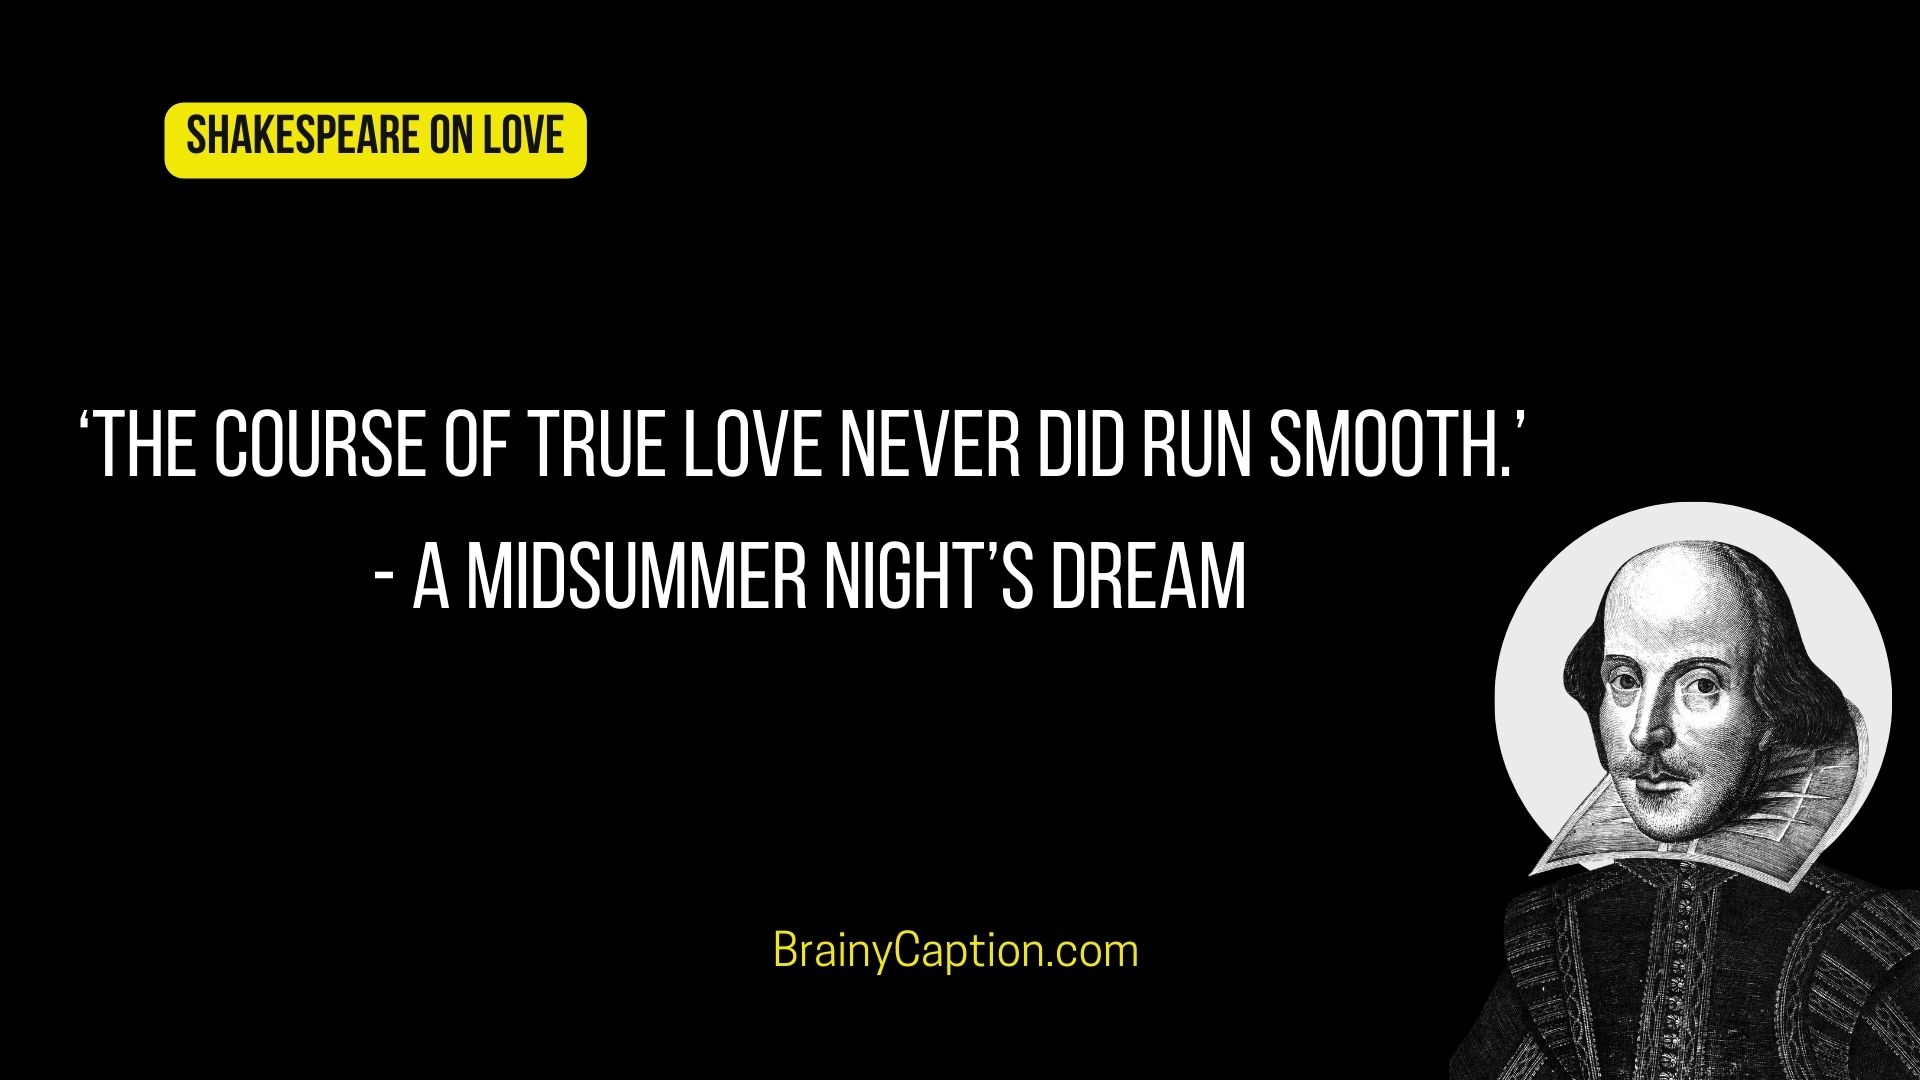 Shakespeare quotes on love from A midsummer night's dream